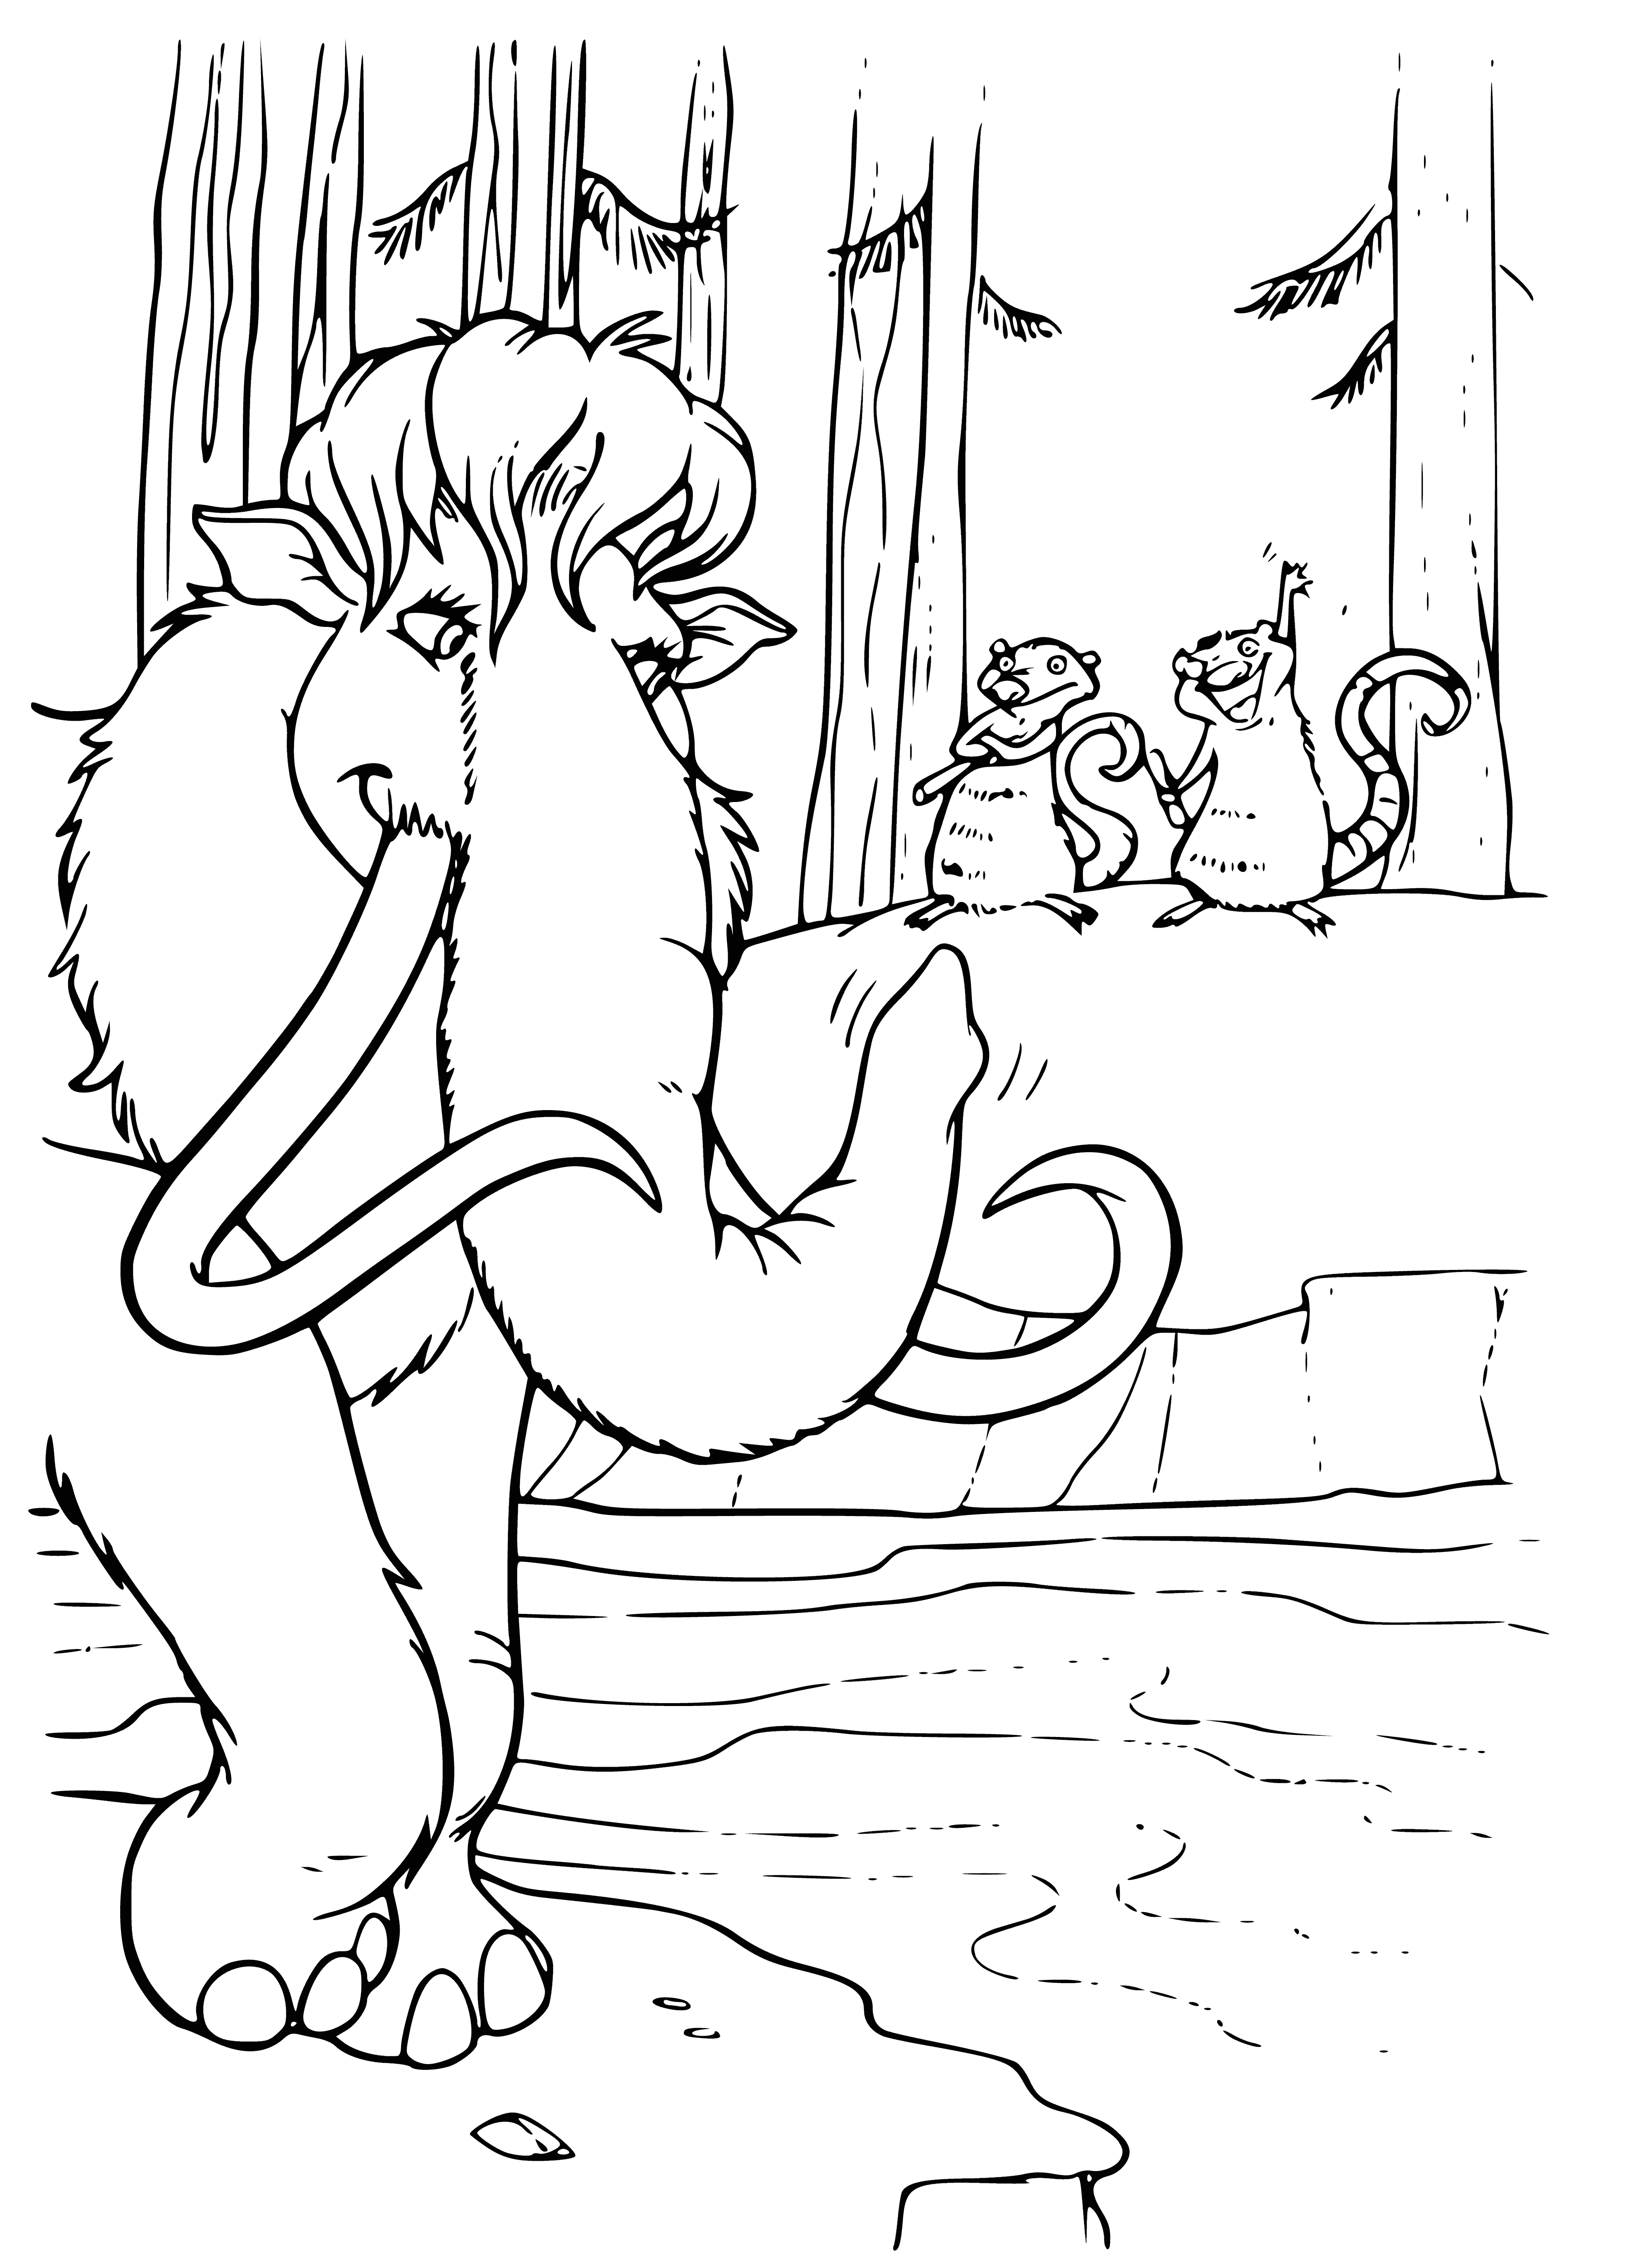 coloring page: Three ice figures, two standing, one sitting, with open mouths and closed eyes.